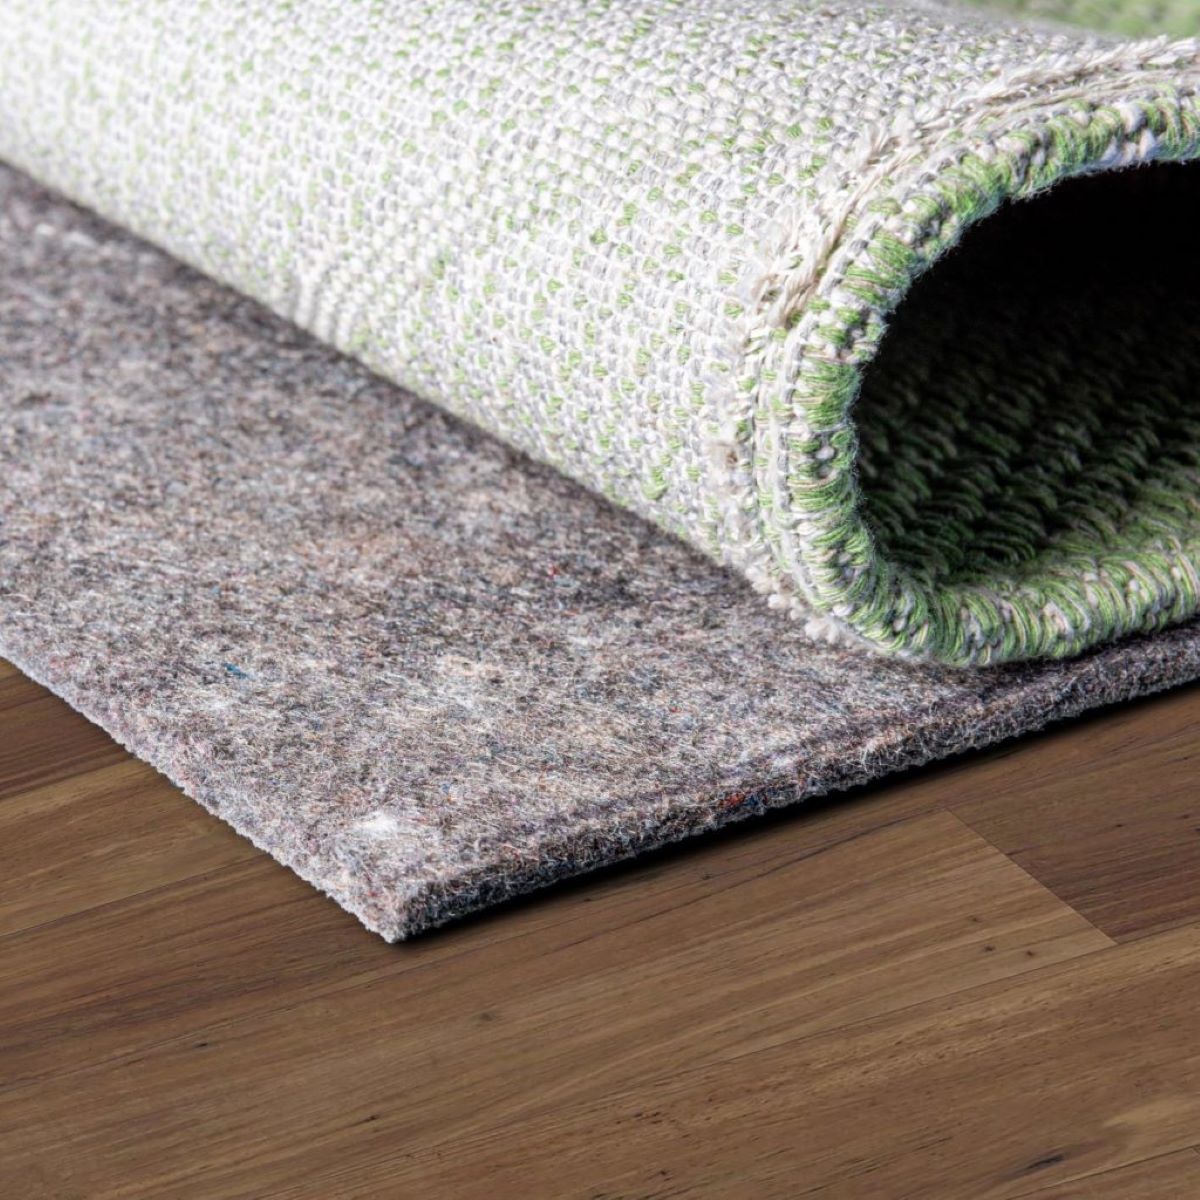 How To Prevent An Area Rug From Moving On A Carpet